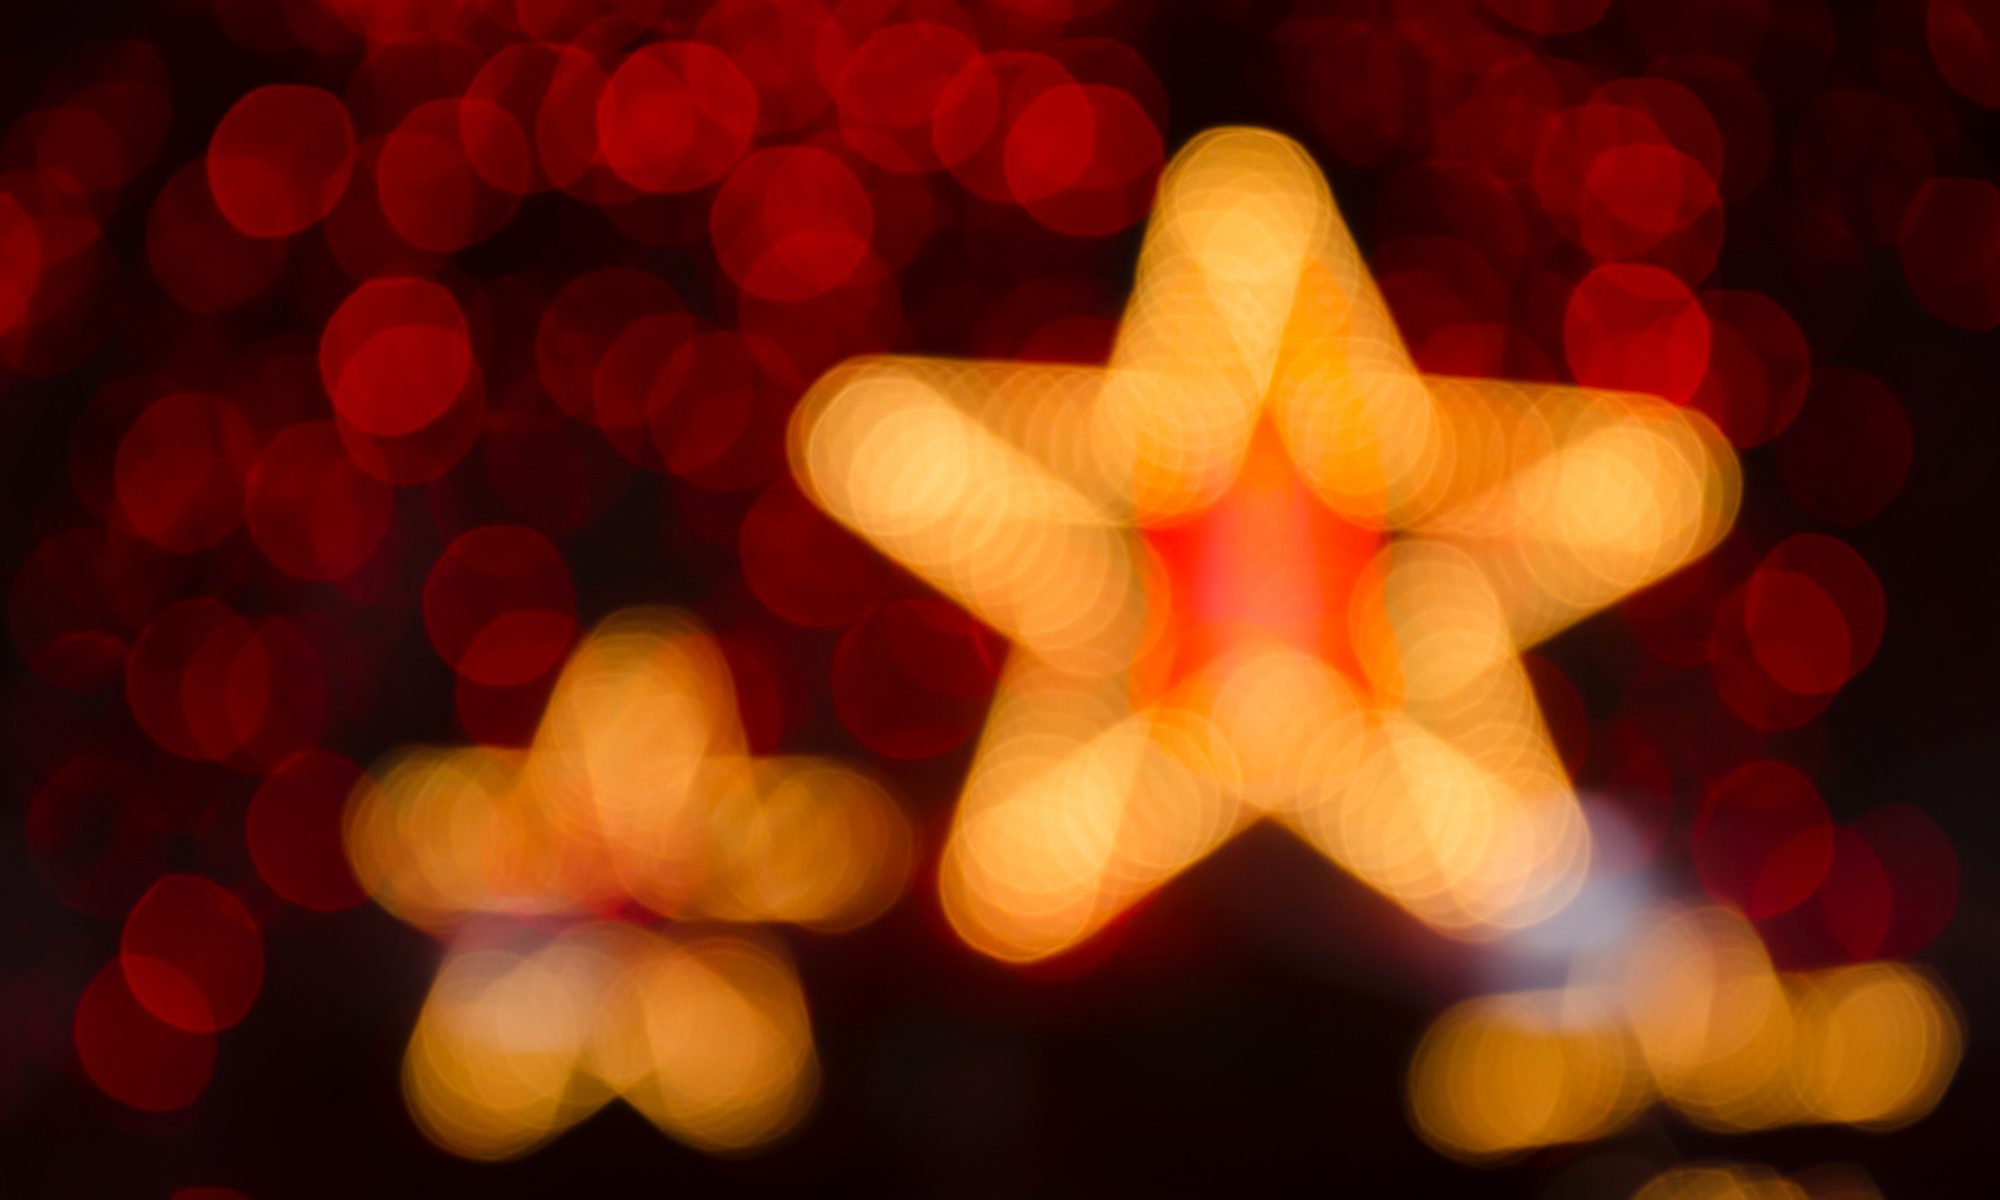 A photograph of a star-shaped light, softly glowing and appearing blurred or out-of-focus against a darker background